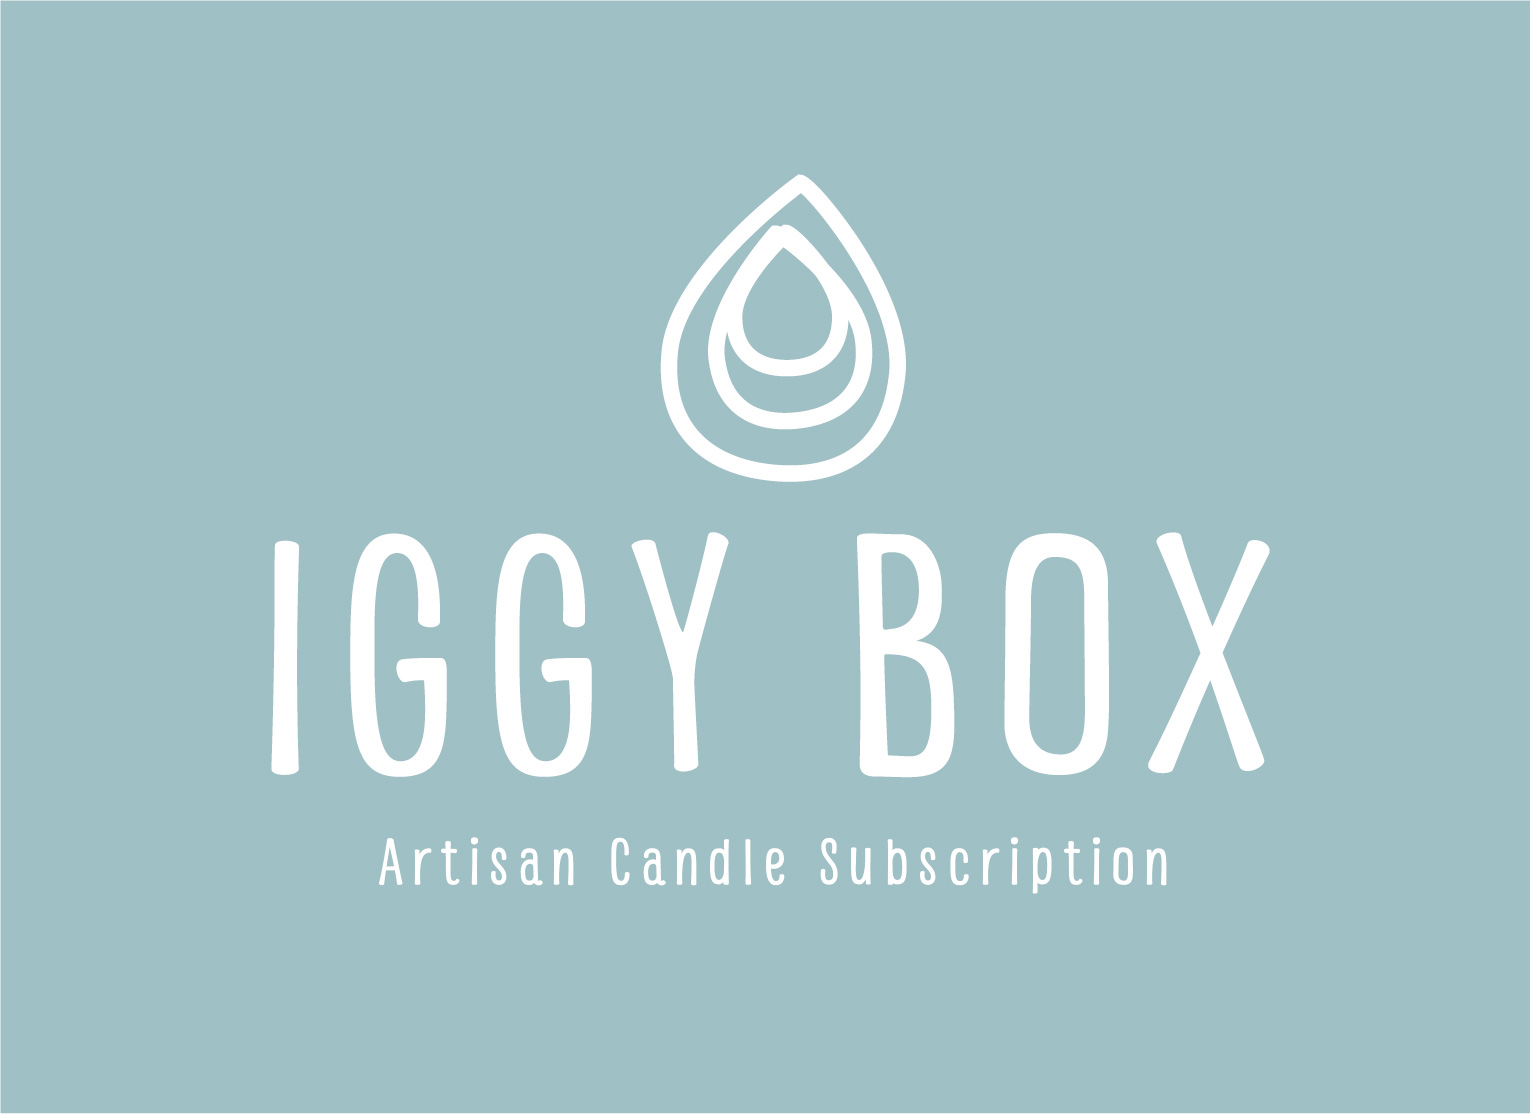 Iggy Box coupons and promo codes